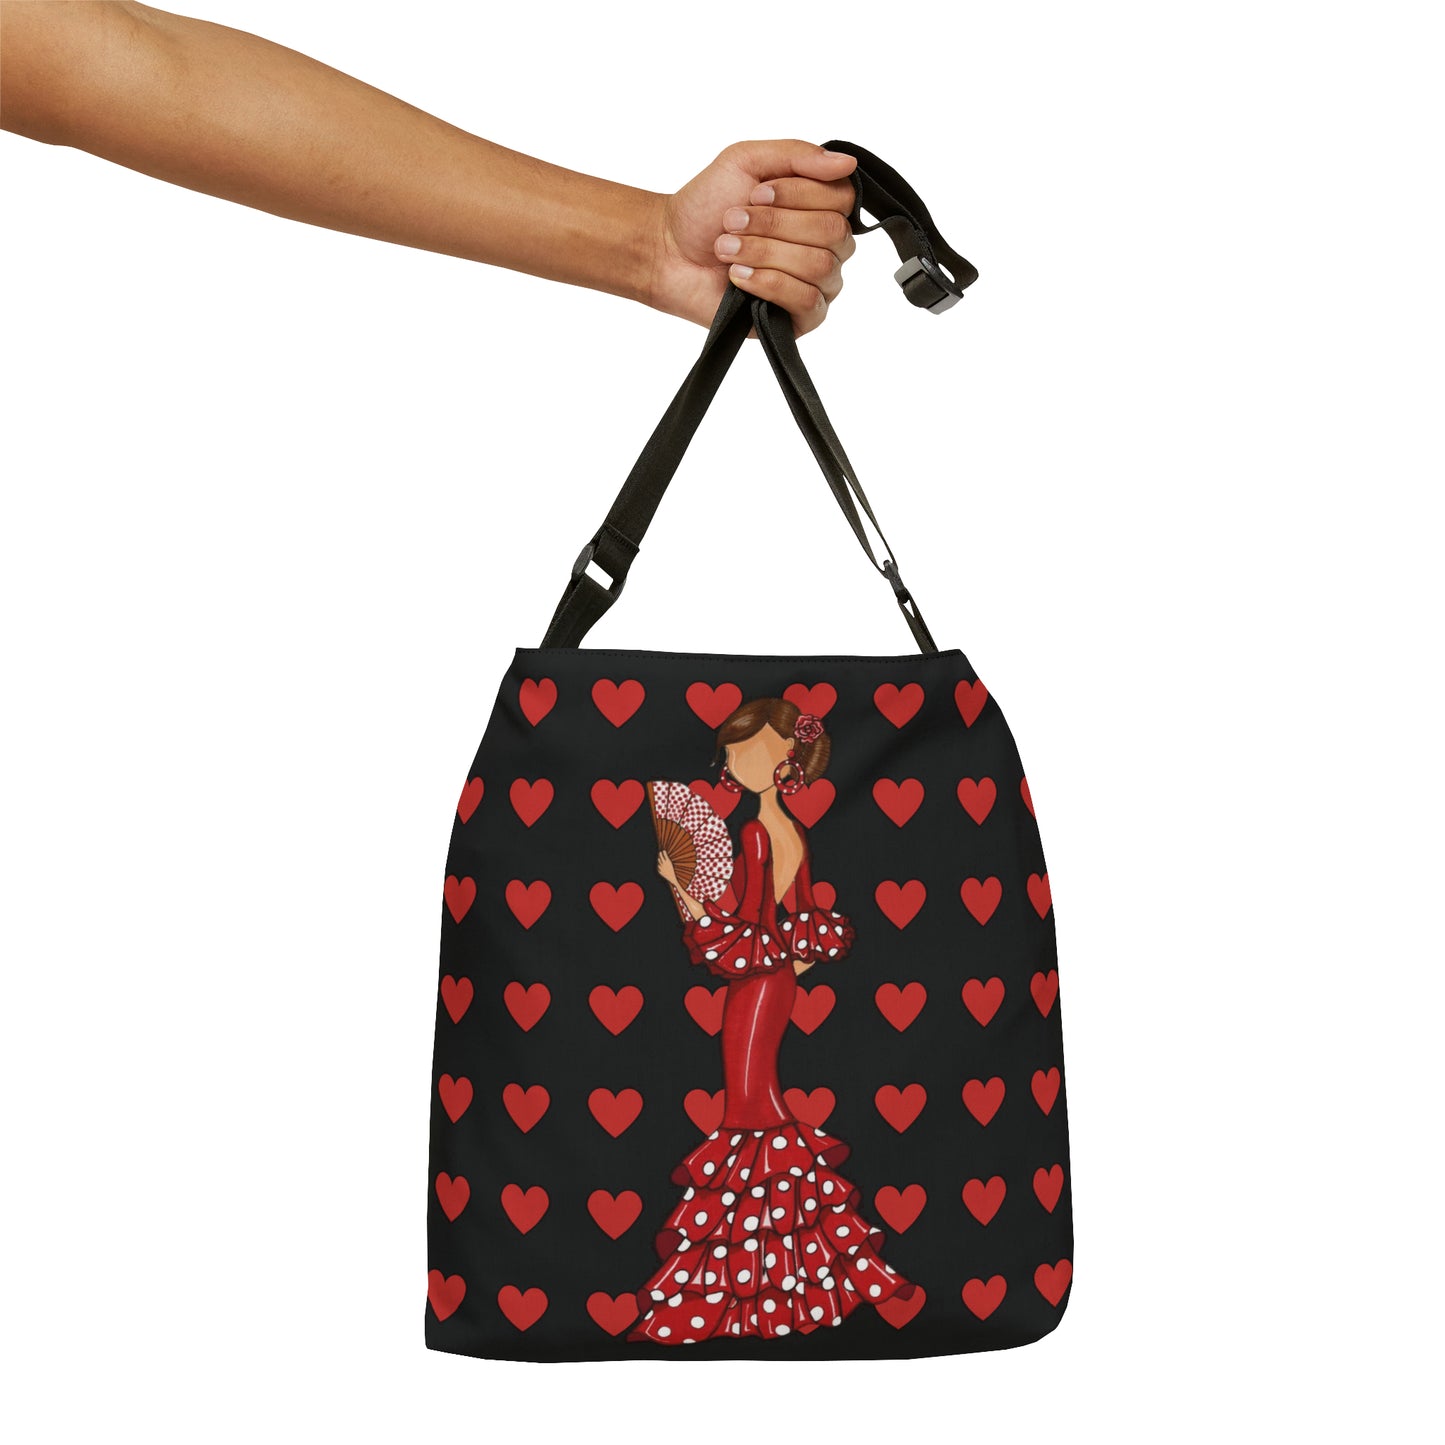 a hand holding a black and red bag with hearts on it